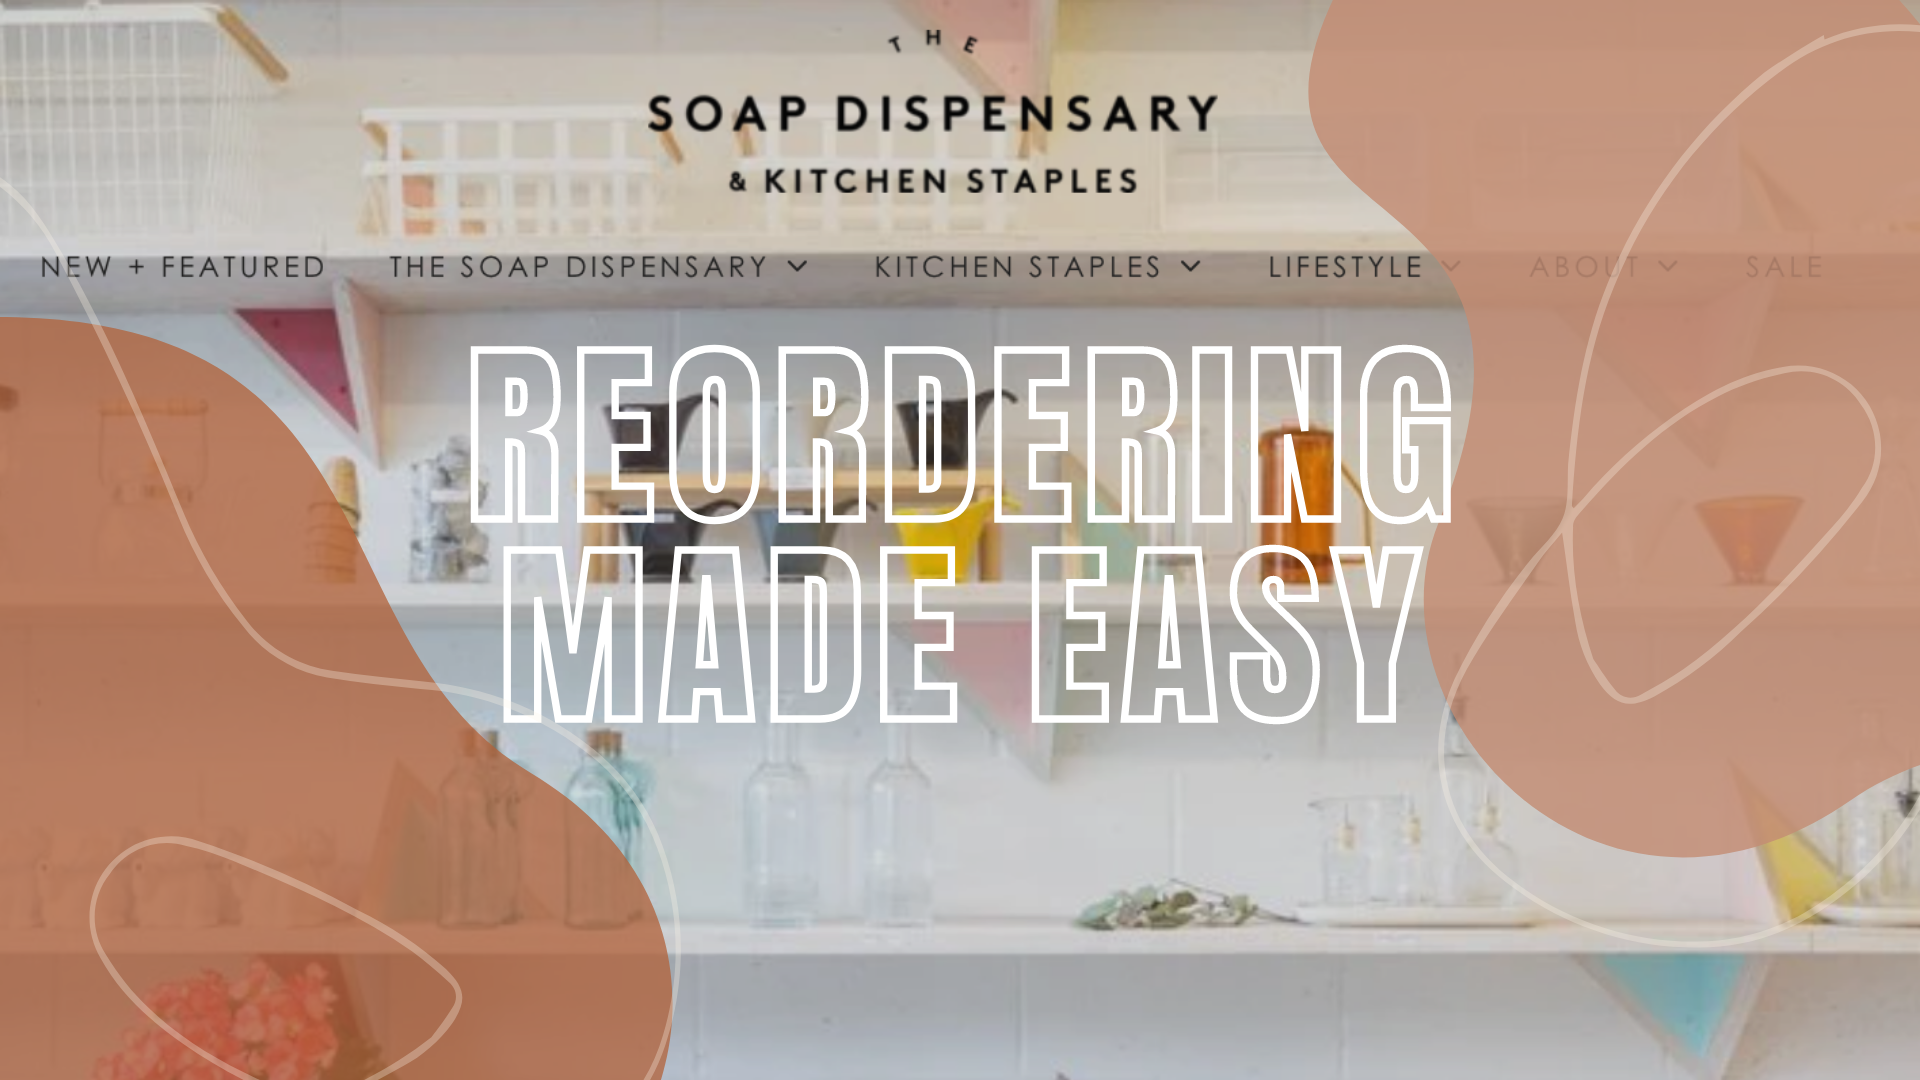 Sweater Stone – The Soap Dispensary and Kitchen Staples